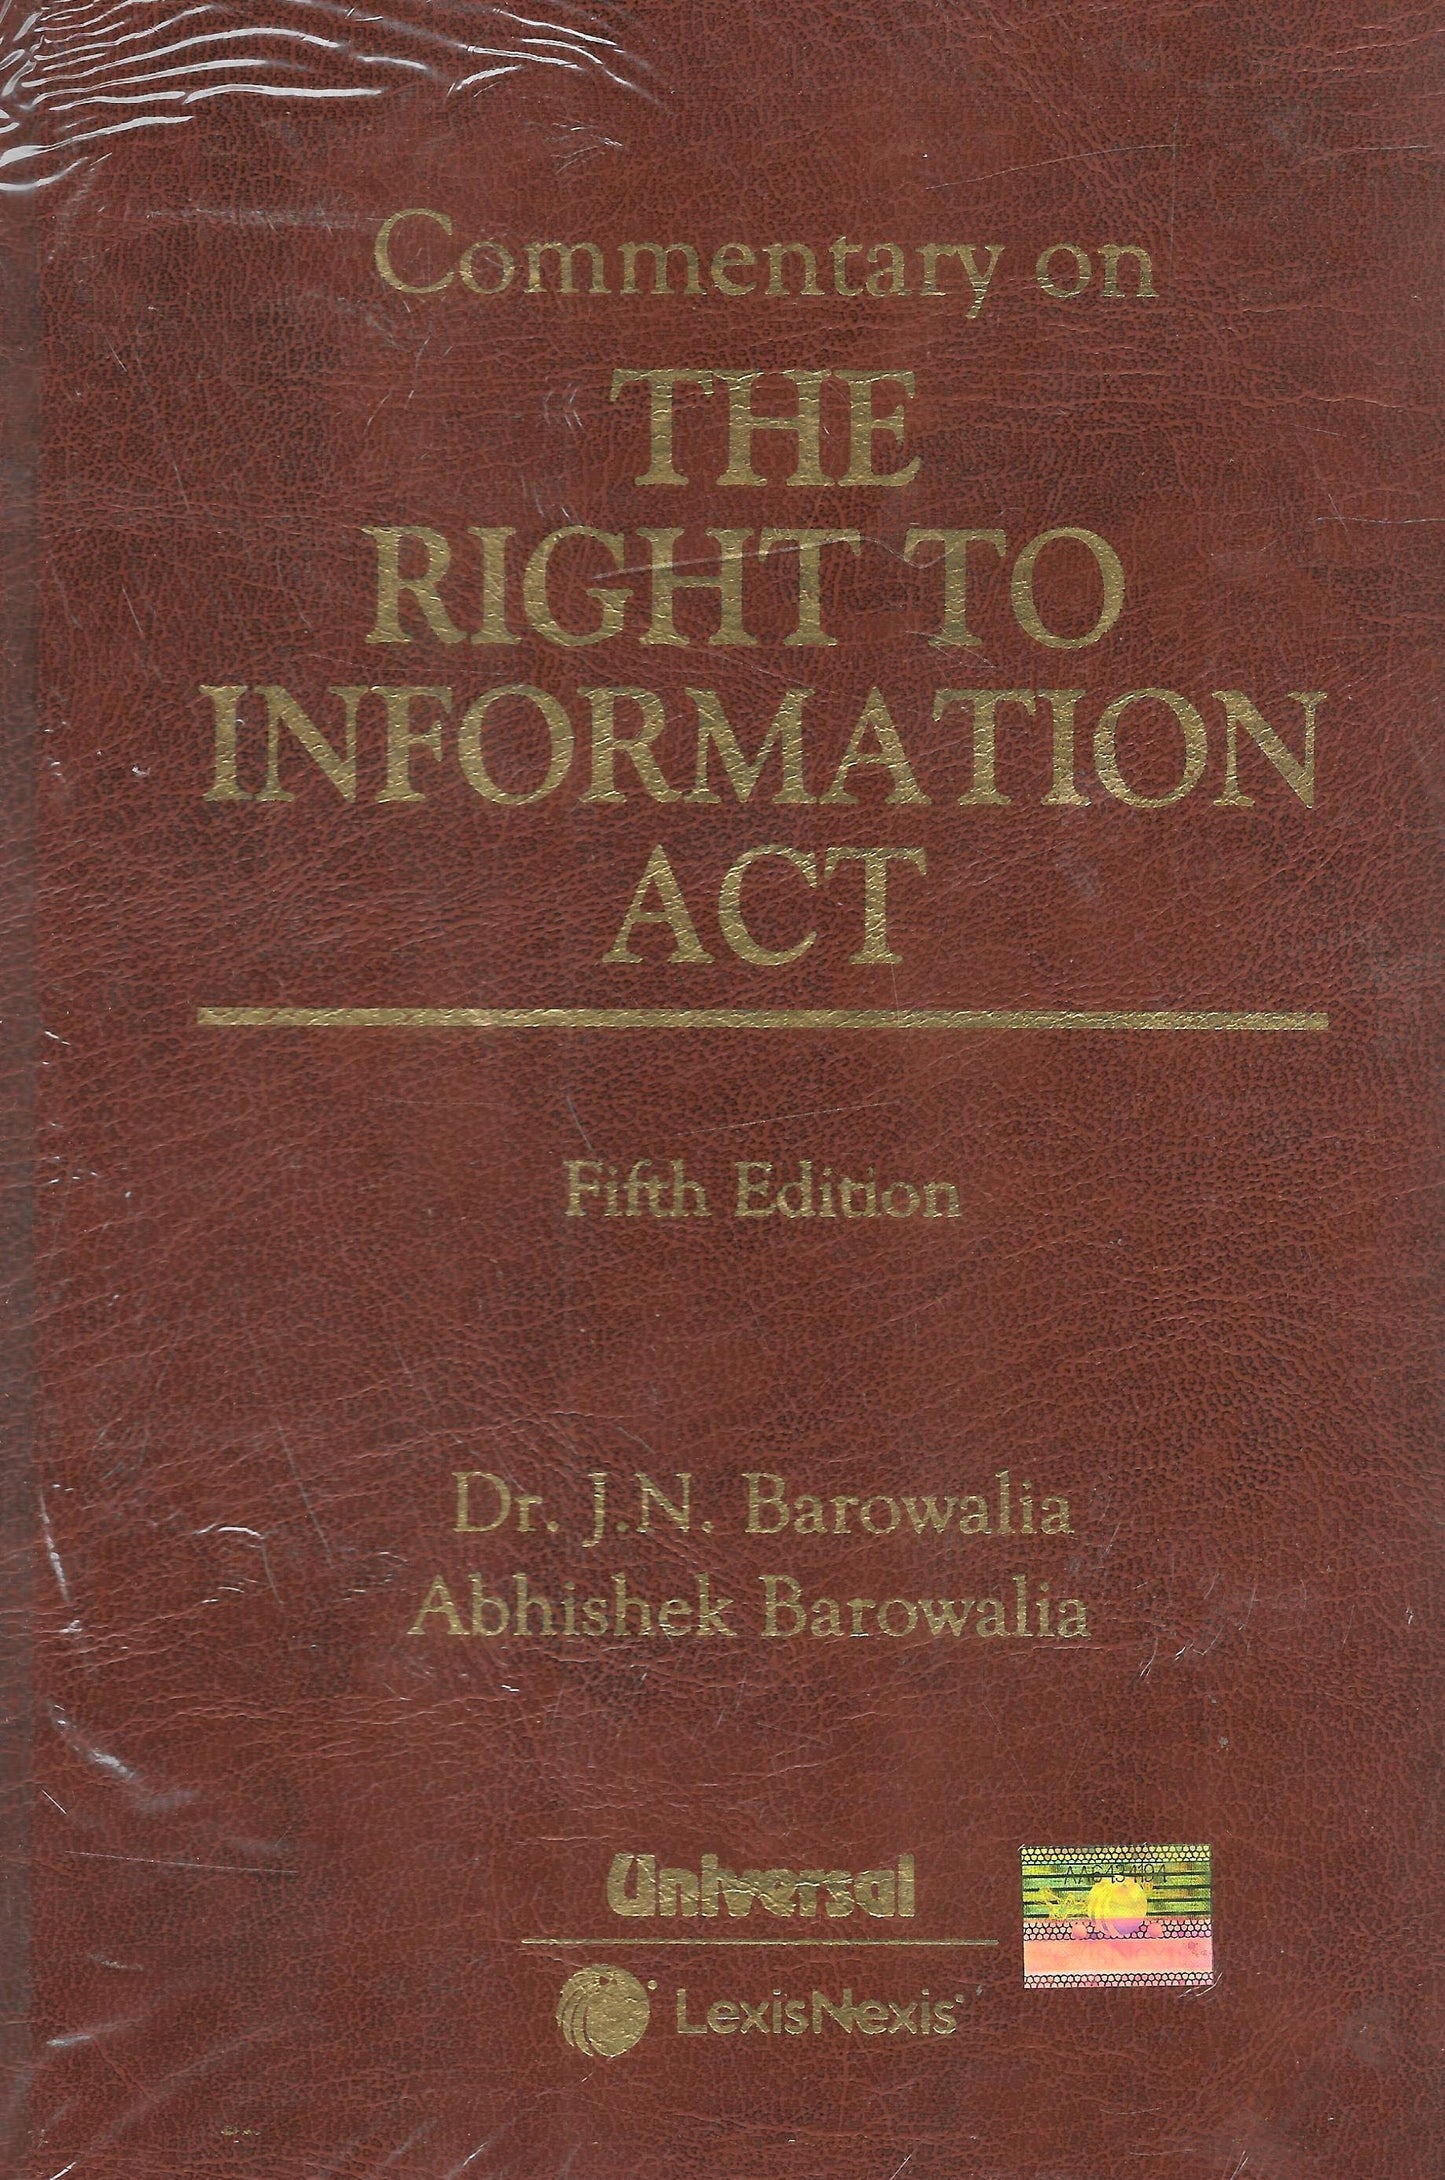 Commentary on The Right to Information Act